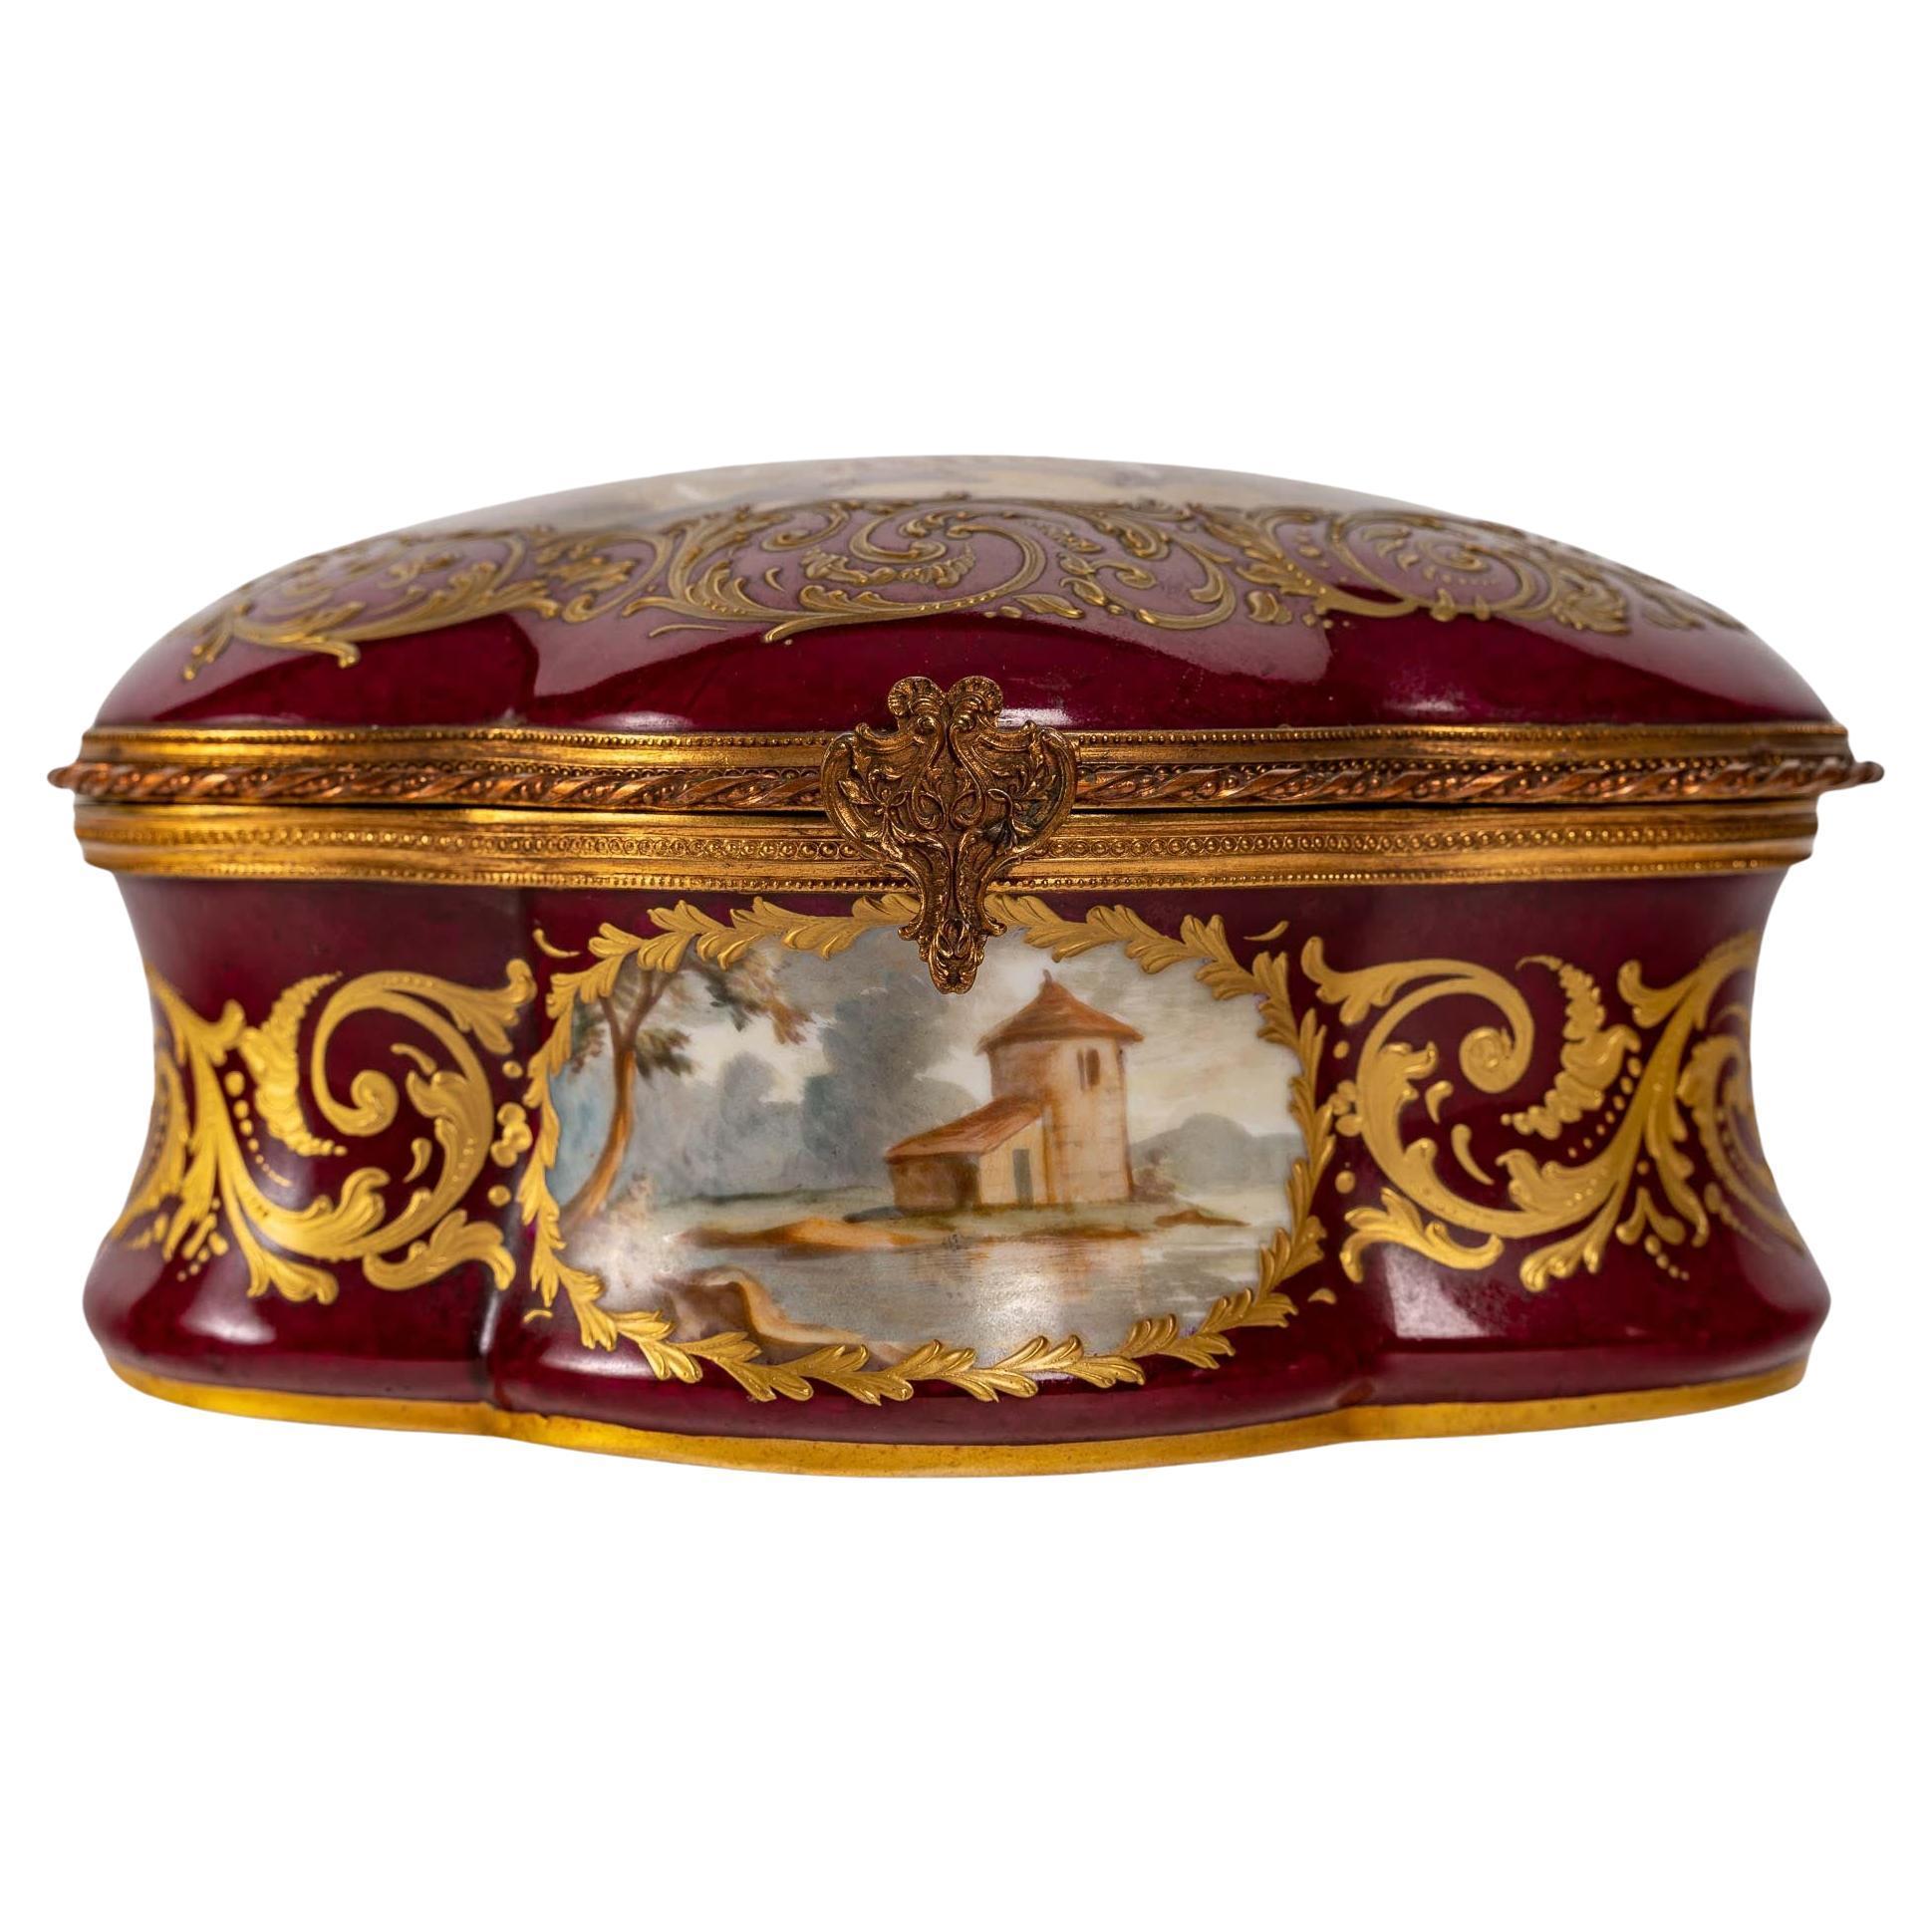 Important box, Sèvres porcelain box, Napoleon III period.

Sèvres porcelain box, jewelry box, decorated with gallant scenes, signed, gilded brass mount, very nice quality, 19th century, Napoleon III.


Dimensions: D: 22cm, H: 10cm.